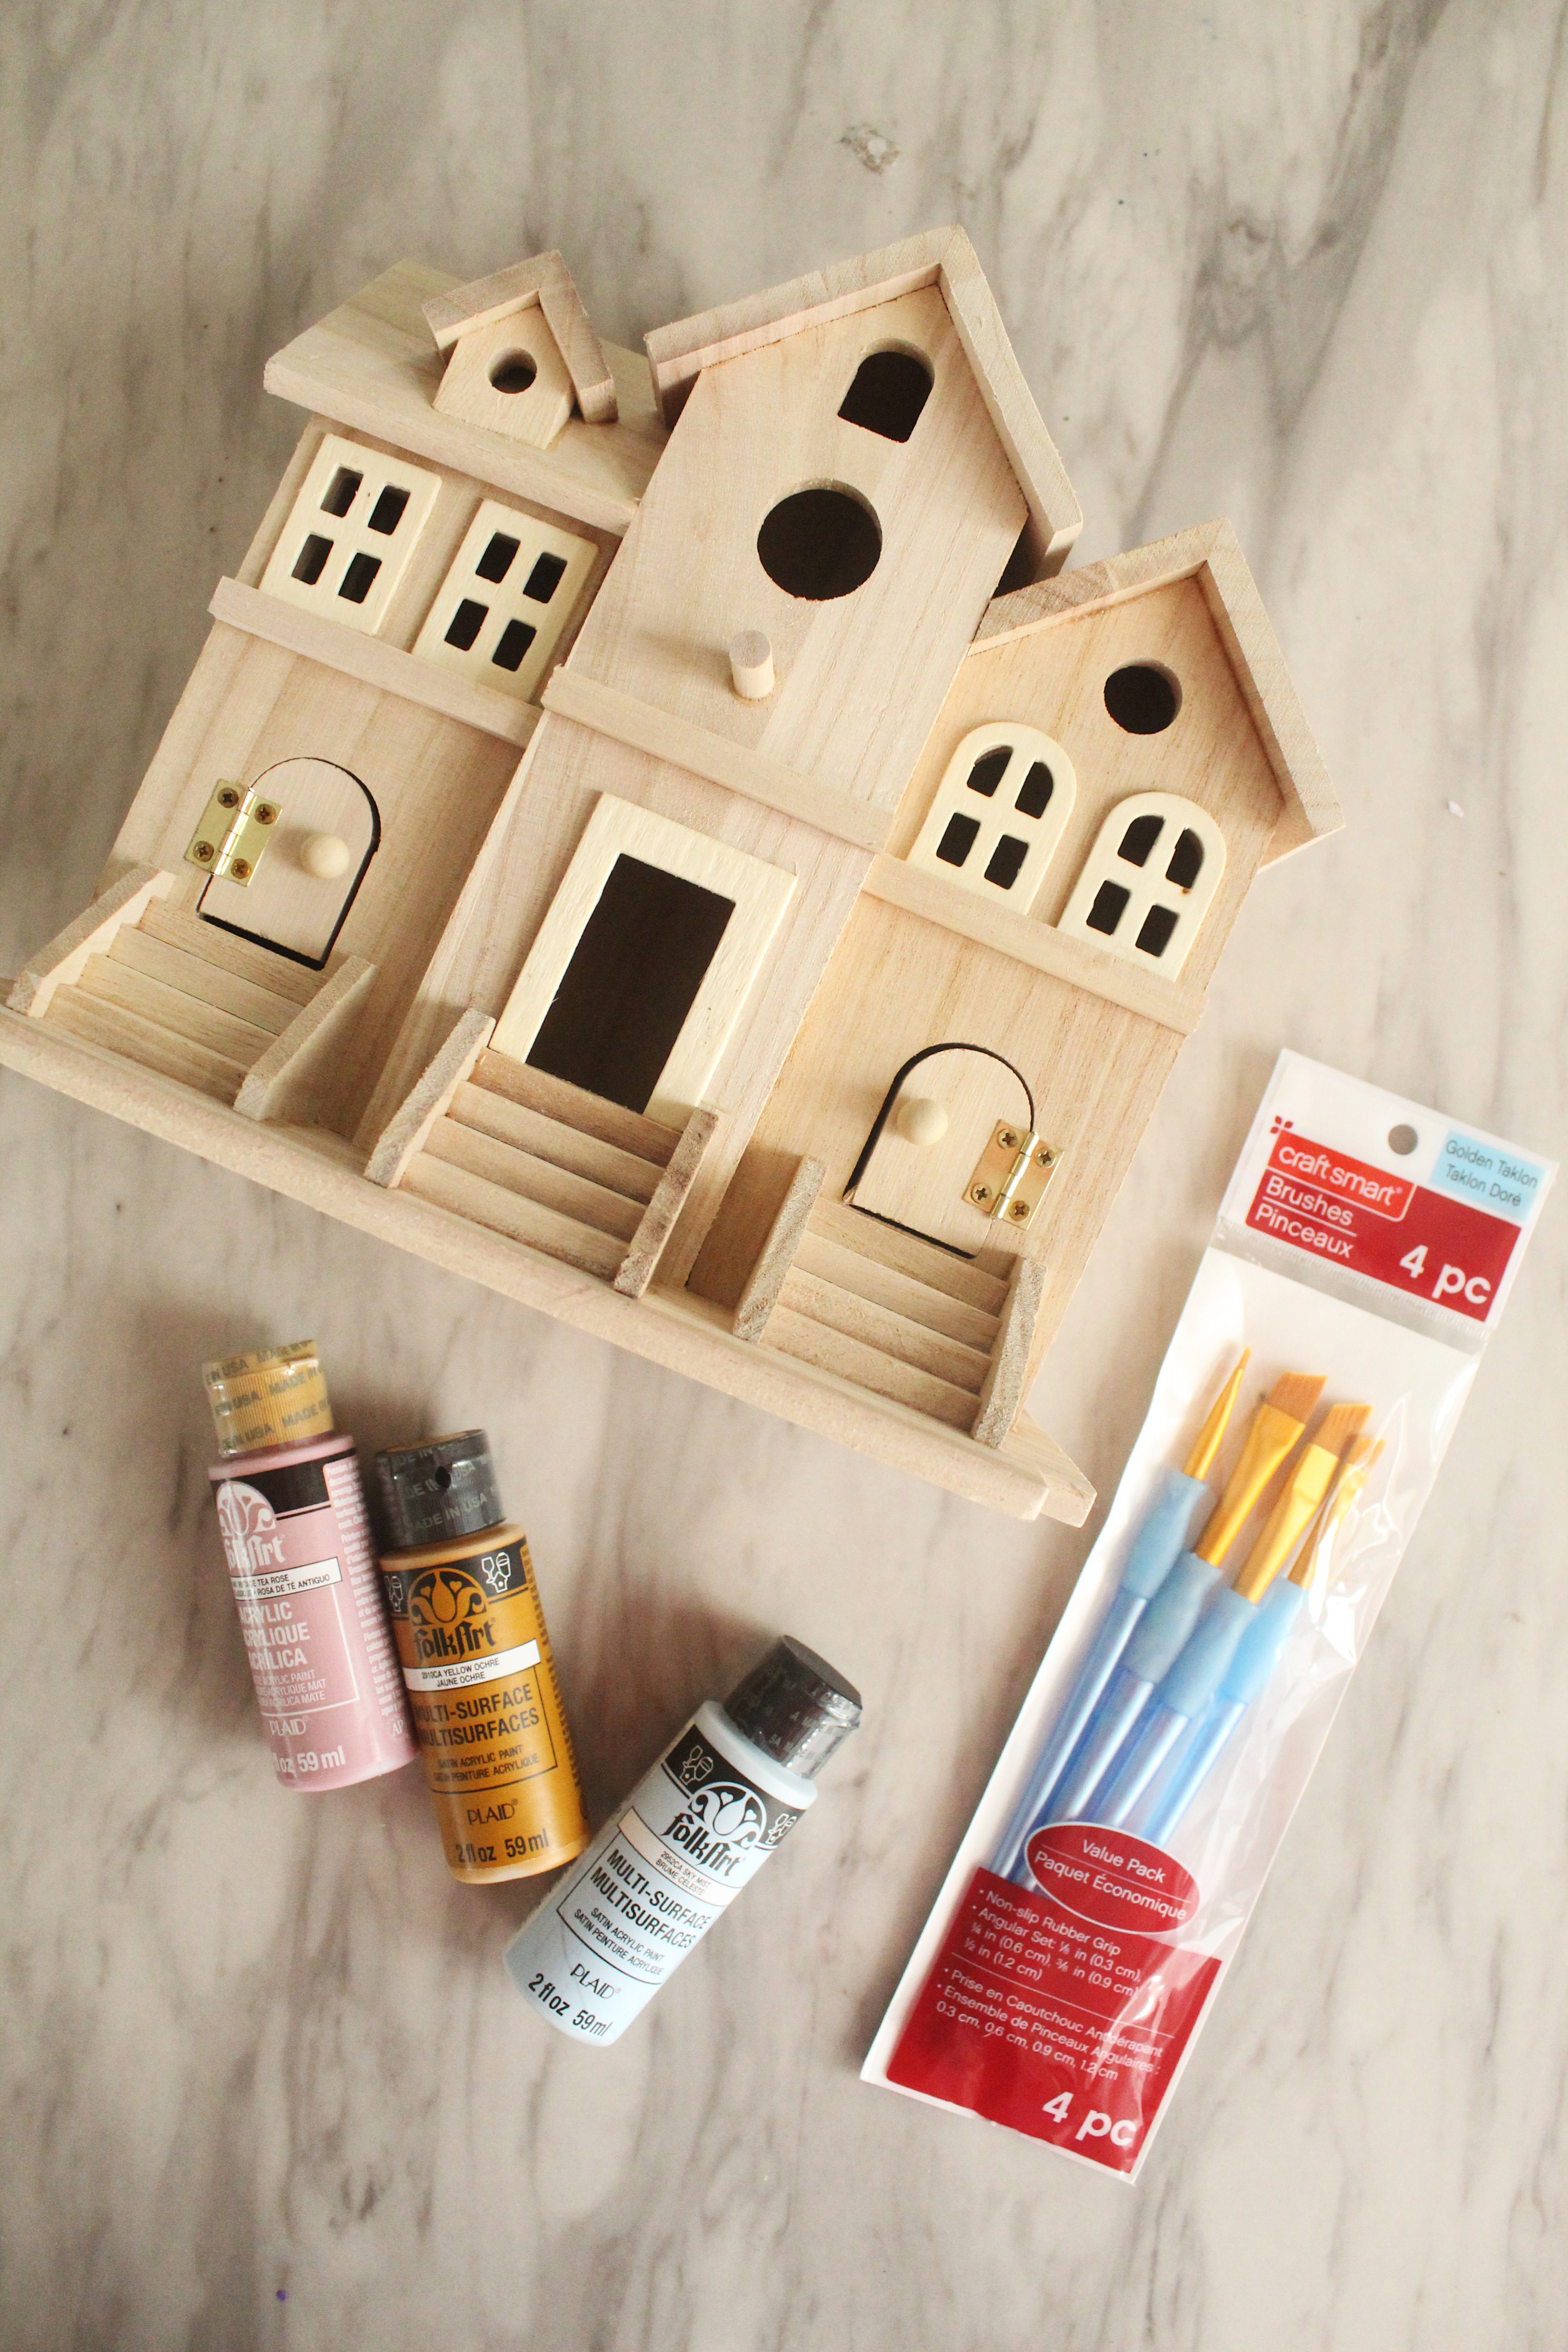 Holiday Brownstone: How to Make Your Own DIY Christmas Village + a tutorial featured by Top US Craft Blog + The Pretty Life Girls